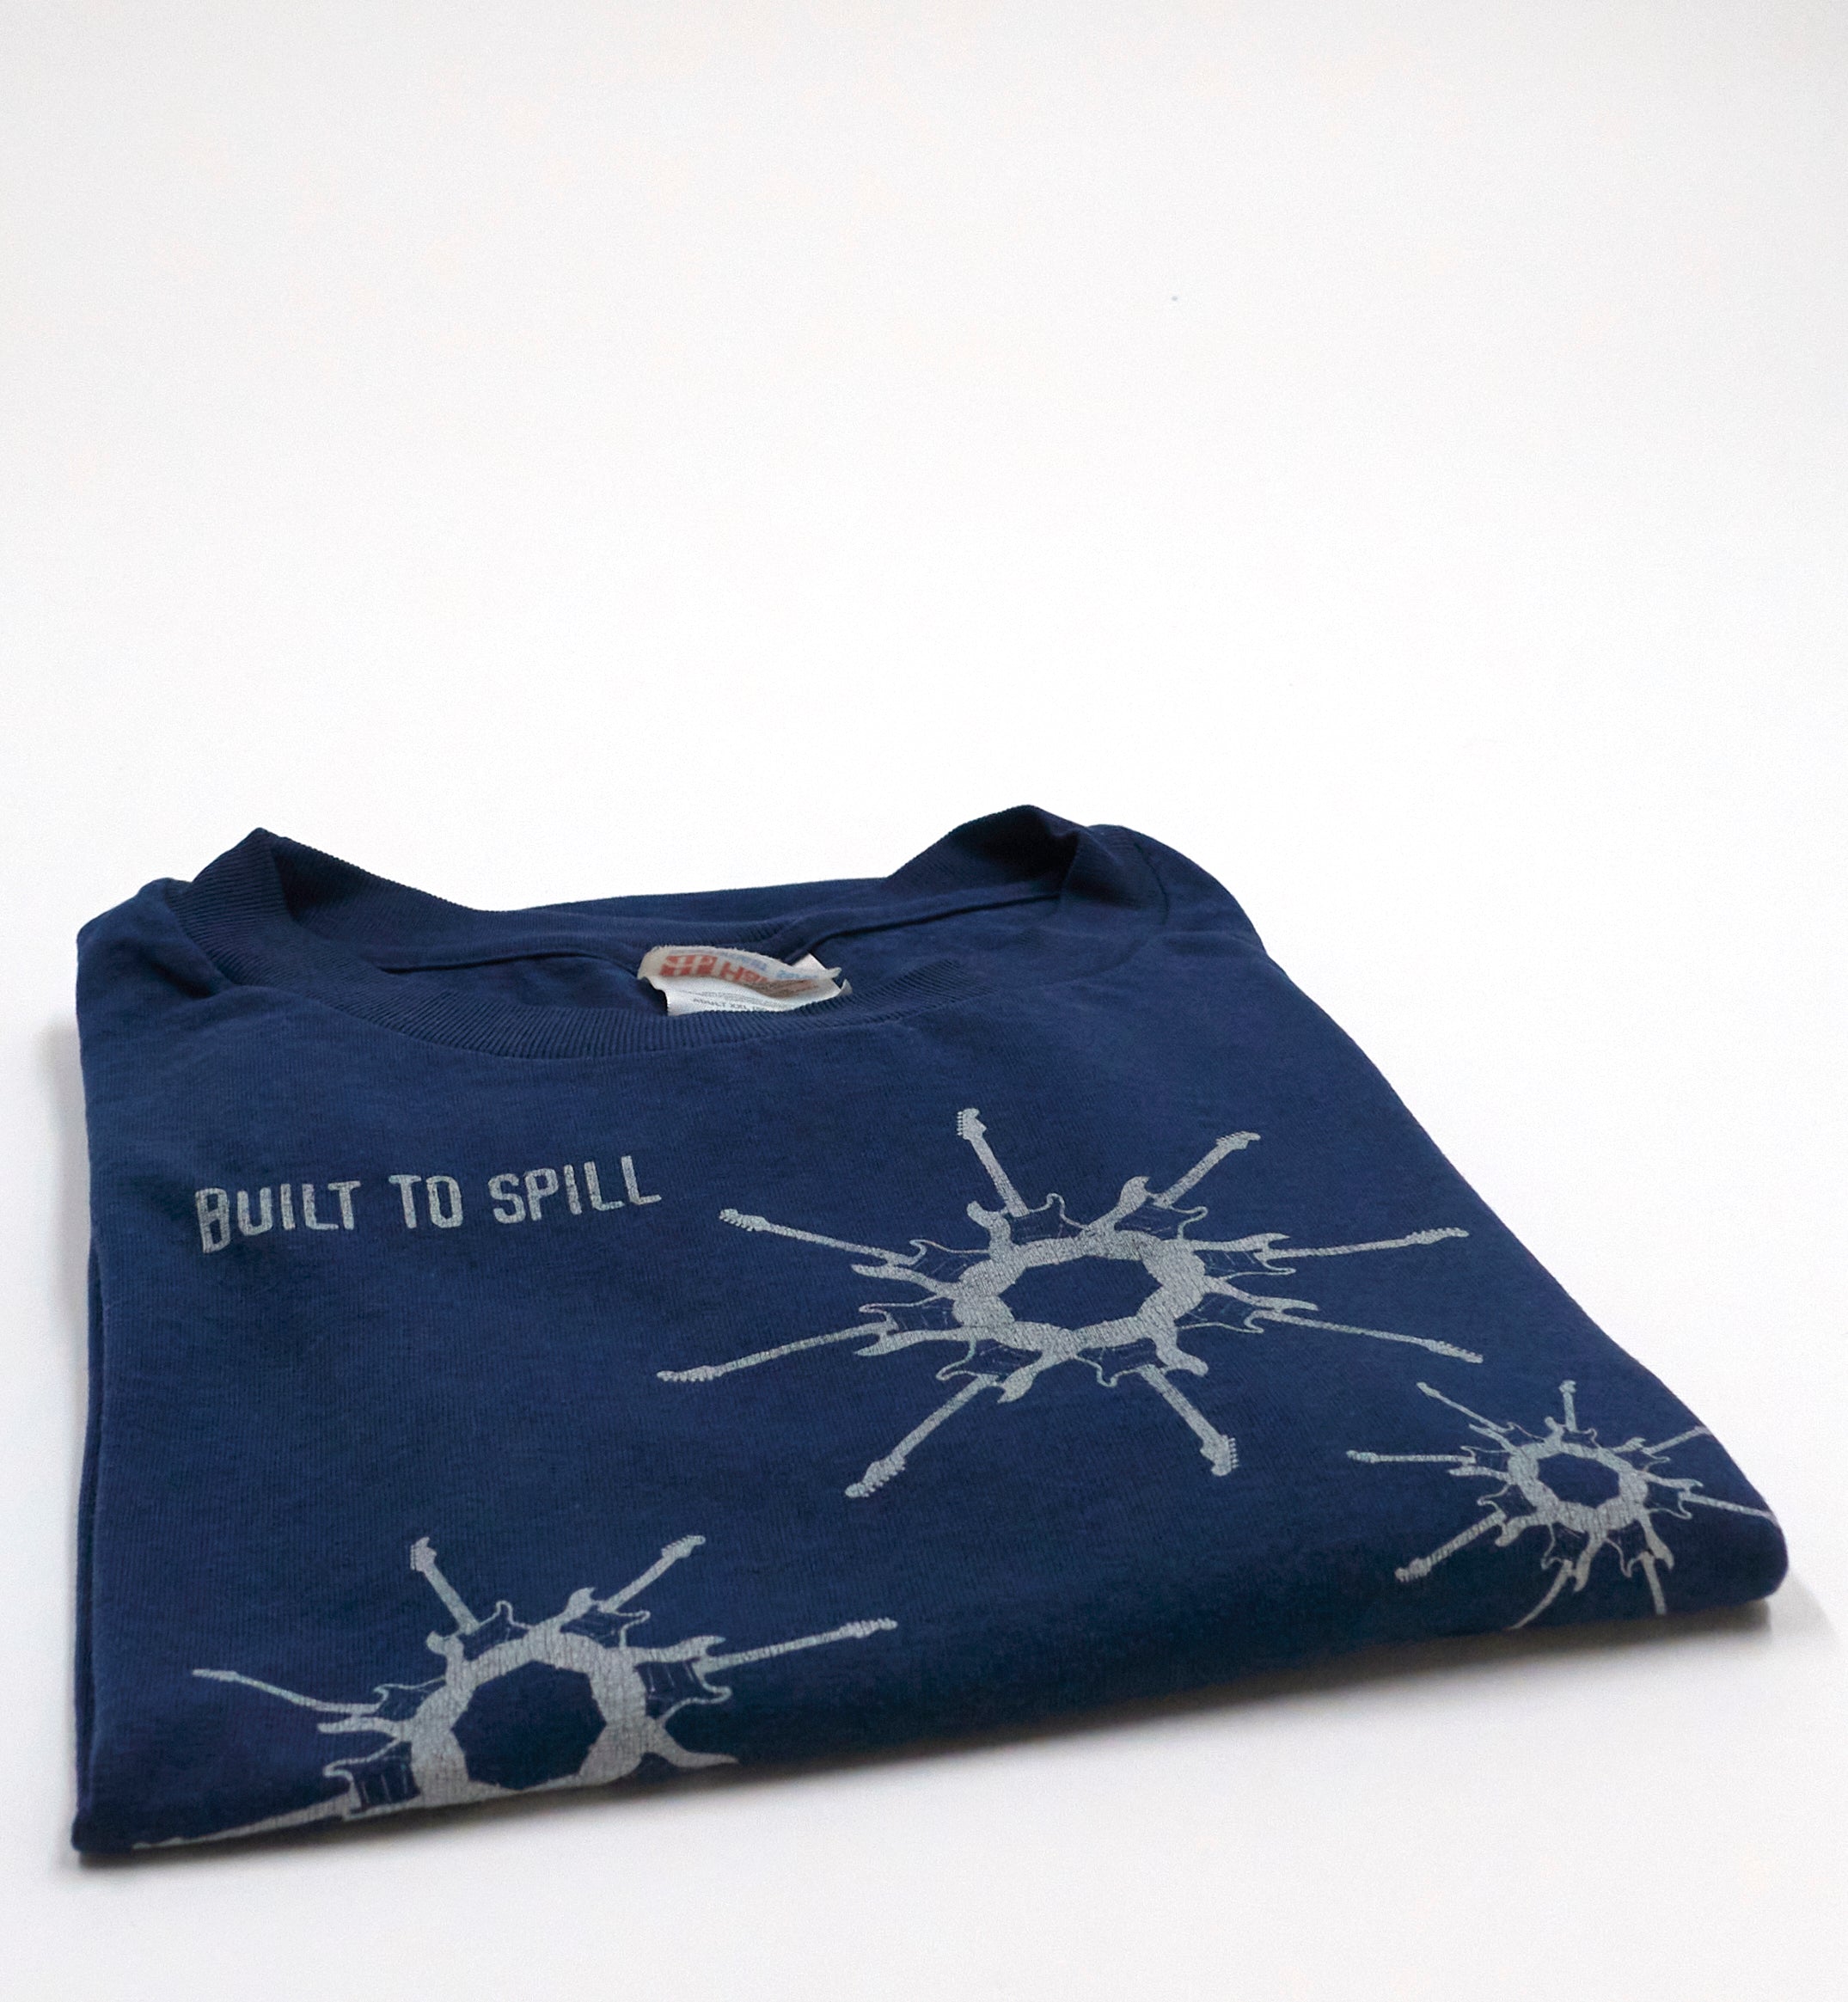 Built To Spill – The Normal Years 1996 Tour Shirt Size XXL